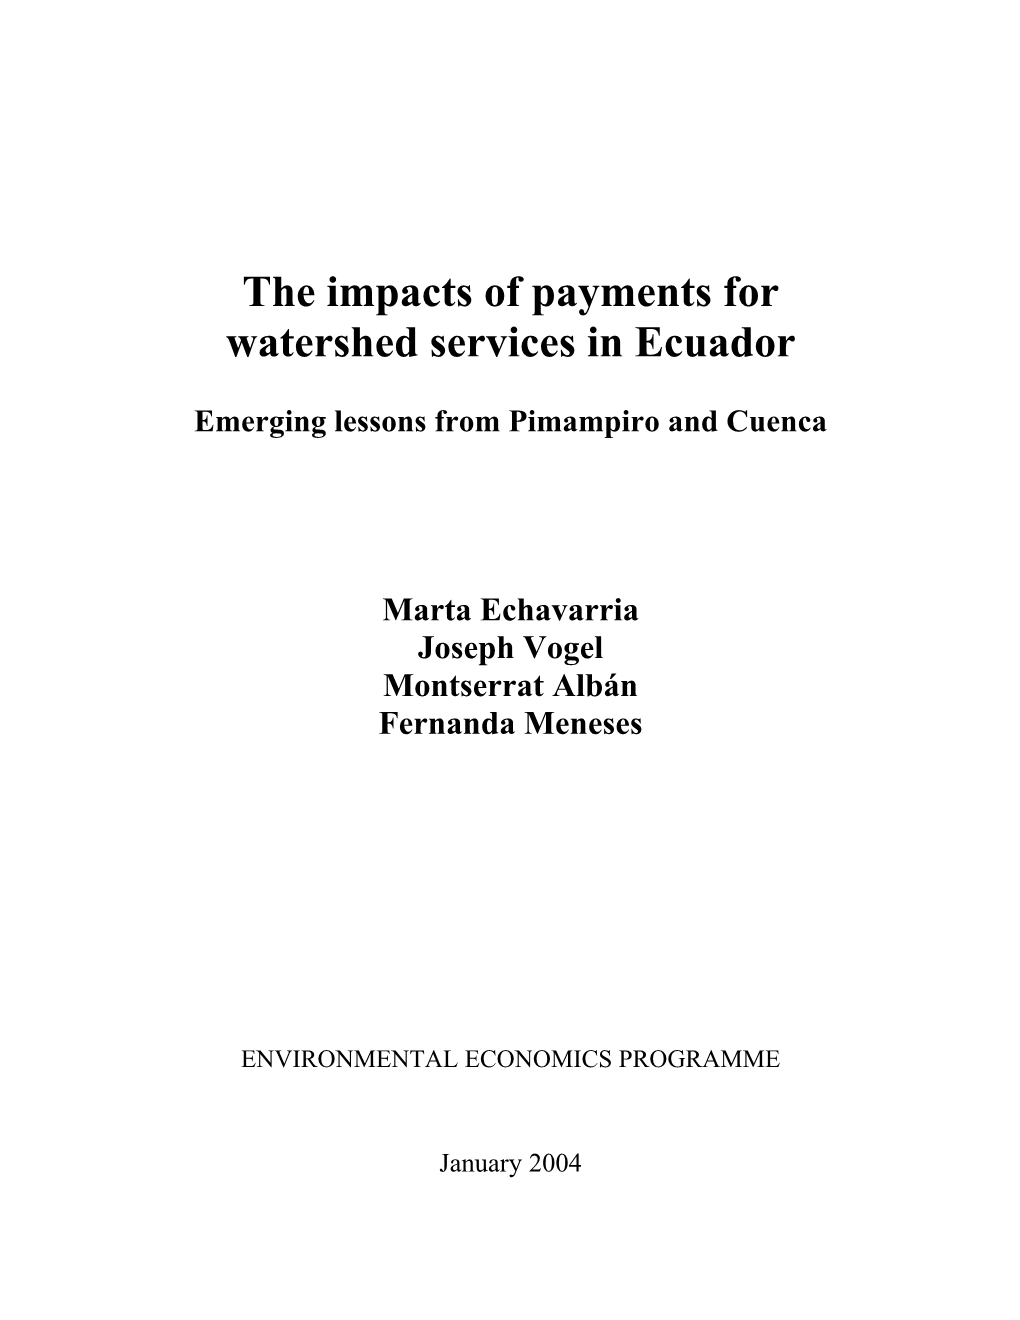 The Impacts of Payments for Watershed Services in Ecuador